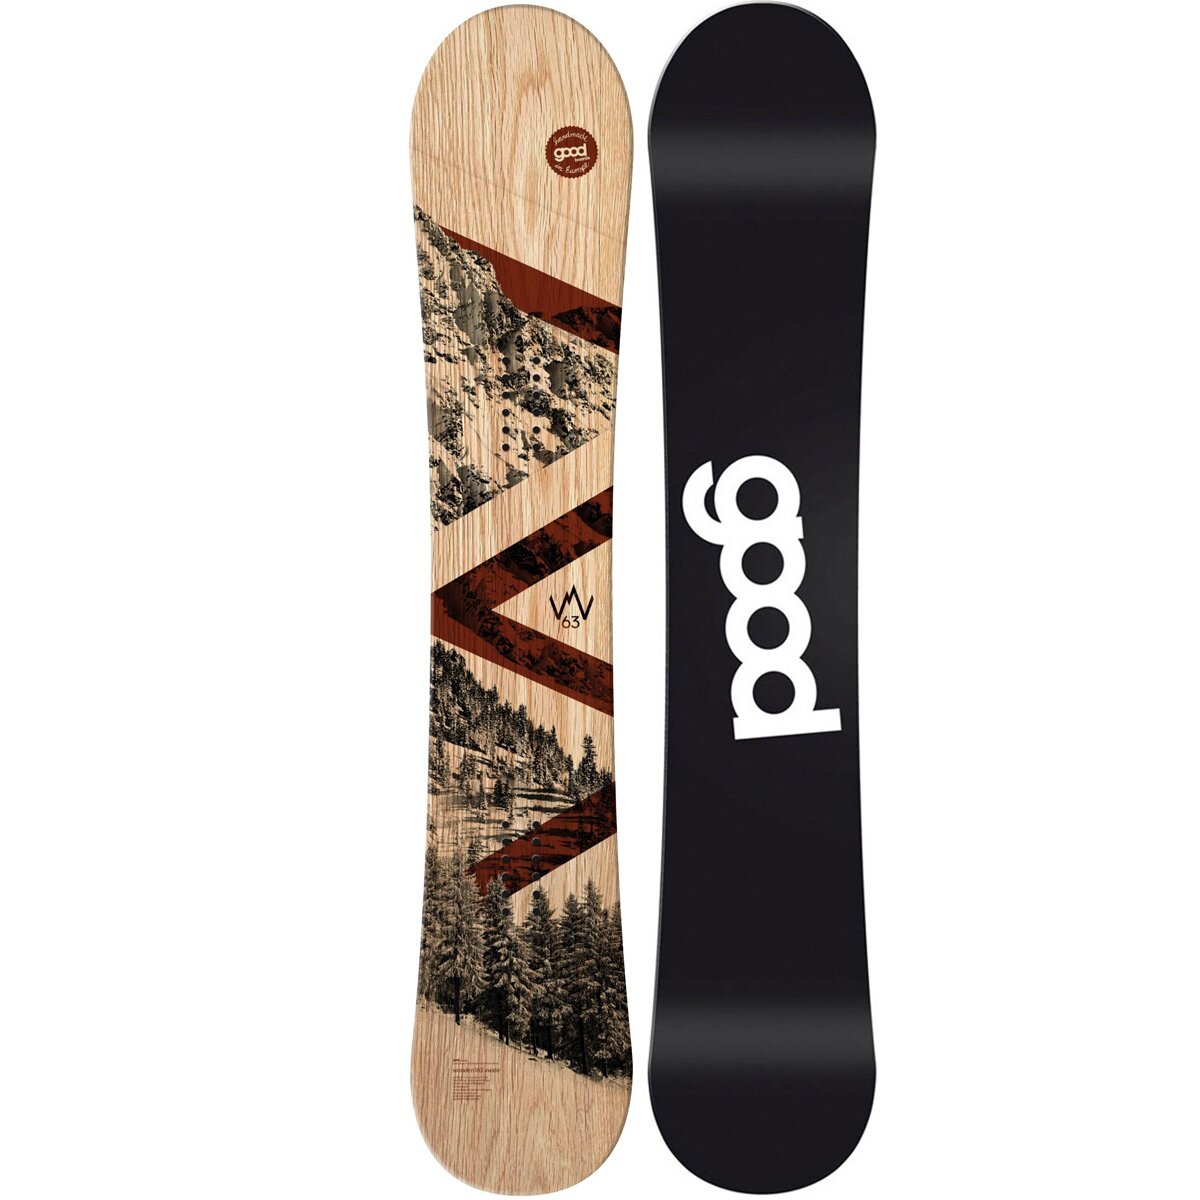 Goodboards WOODEN